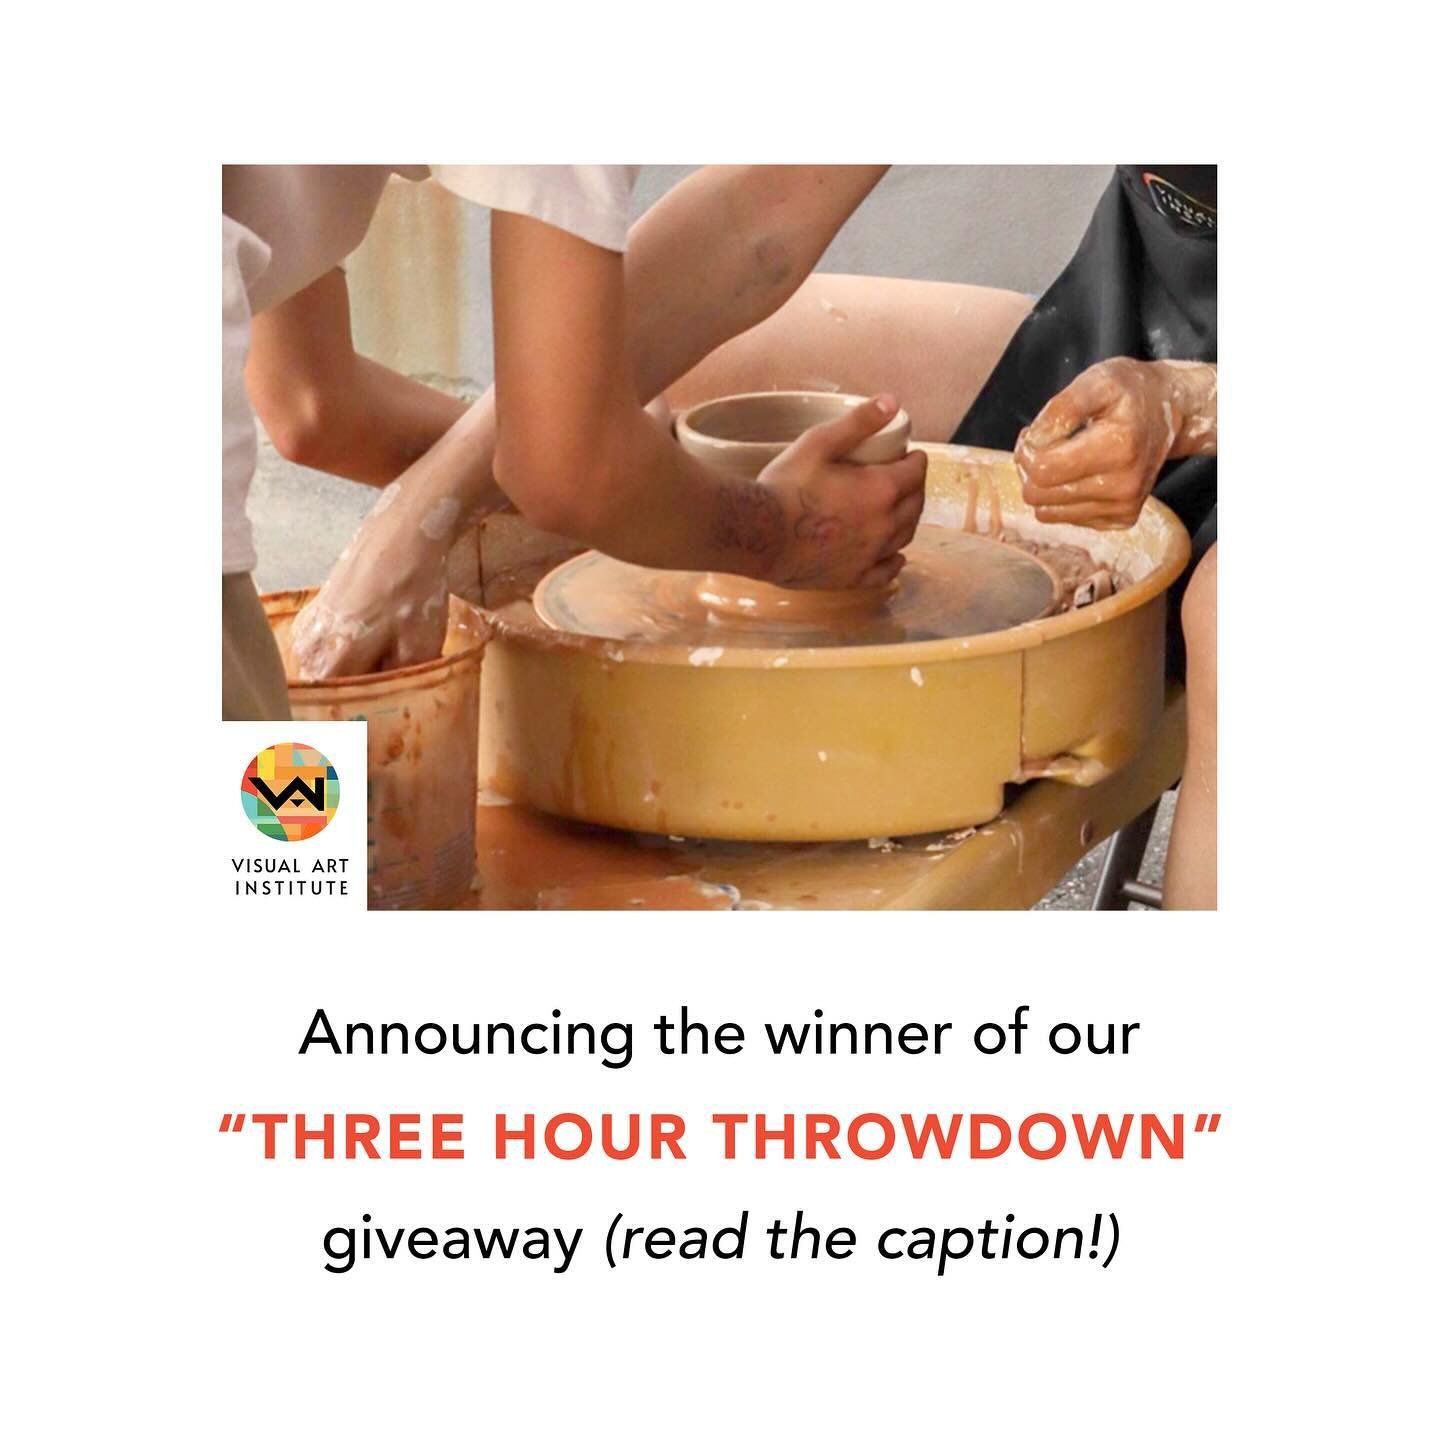 Announcing our &ldquo;THREE HOUR THROWDOWN&rdquo; winner:

JENIFER OGZEWALLA! 🙌

We&rsquo;re so excited for you! You are going to absolutely love your ceramics class! We will contact you via email with more details ✨

Thanks so much to everyone who 